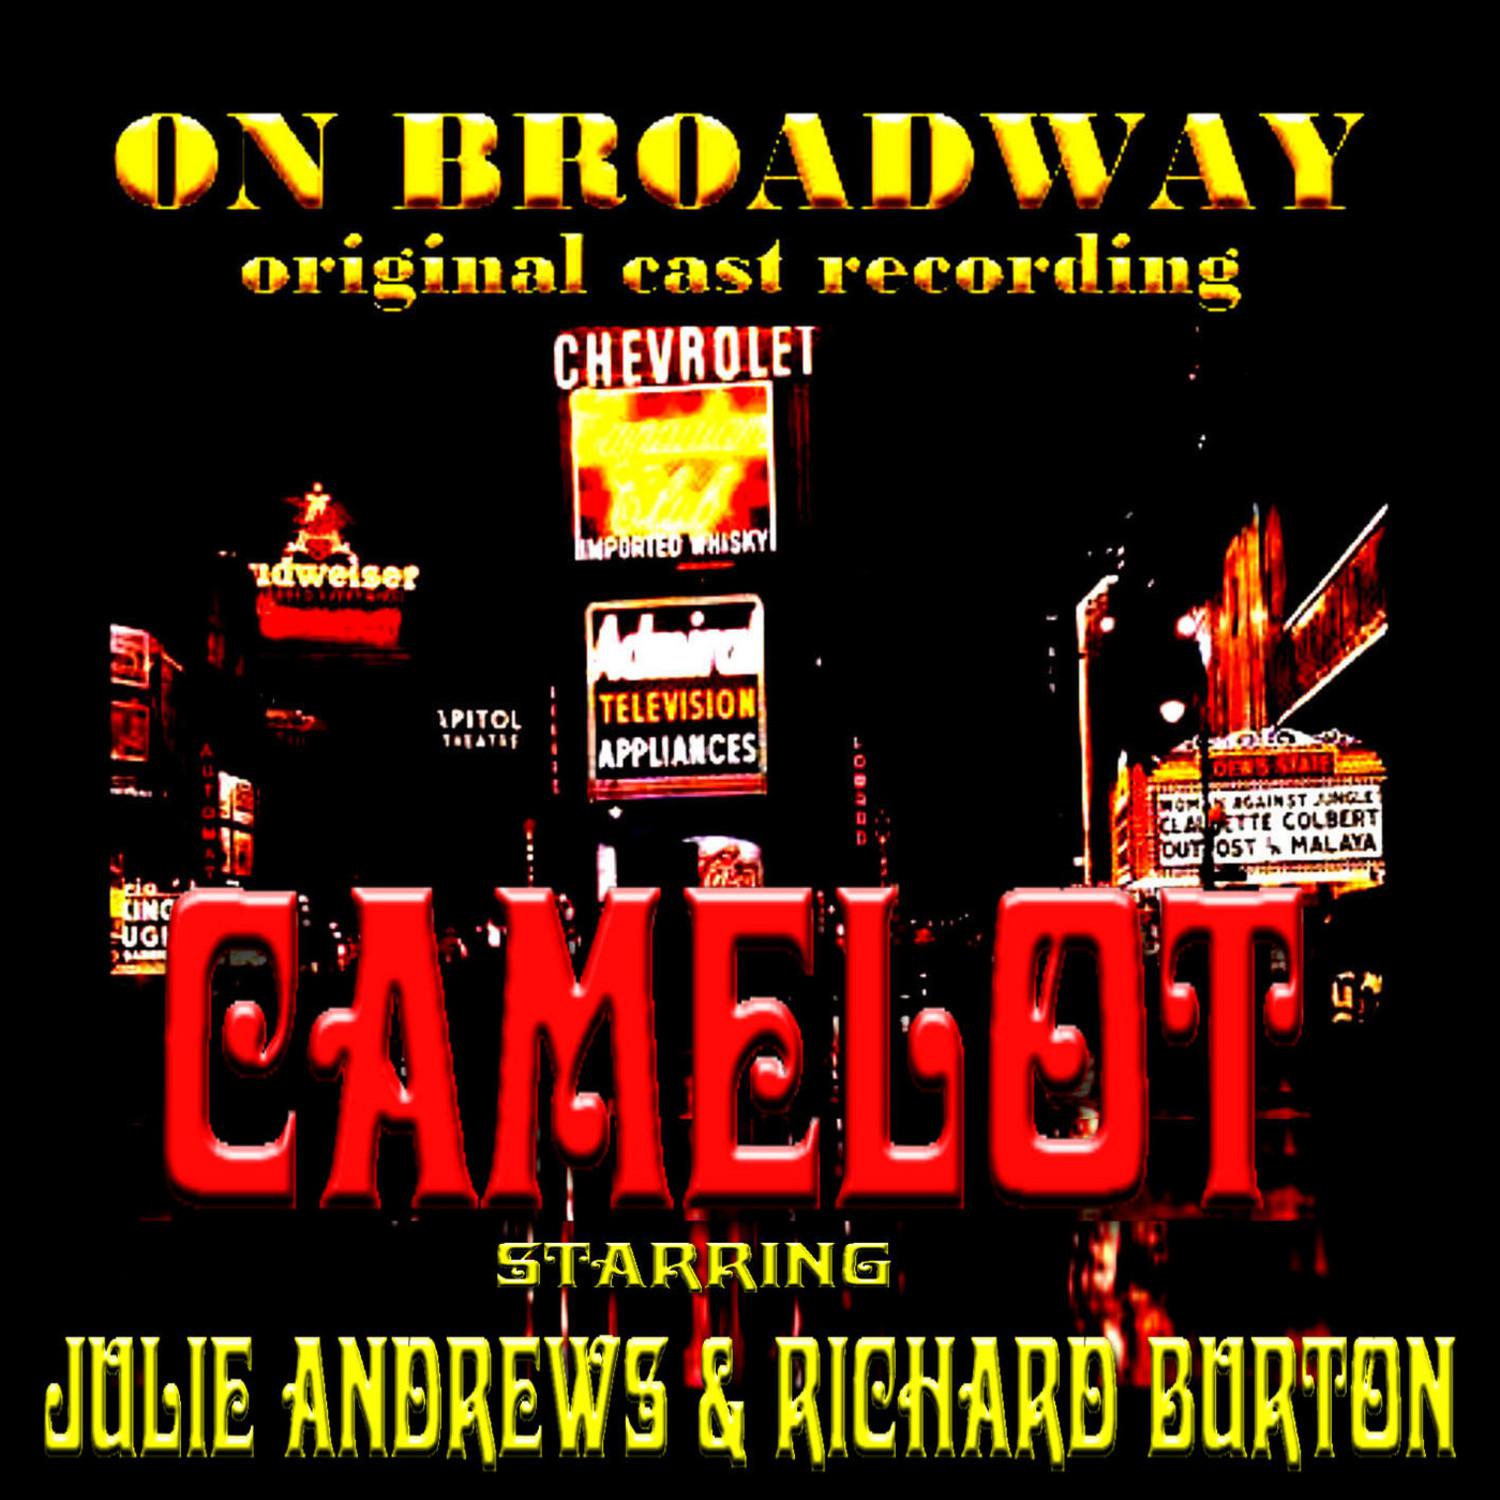 Camelot On Broadway